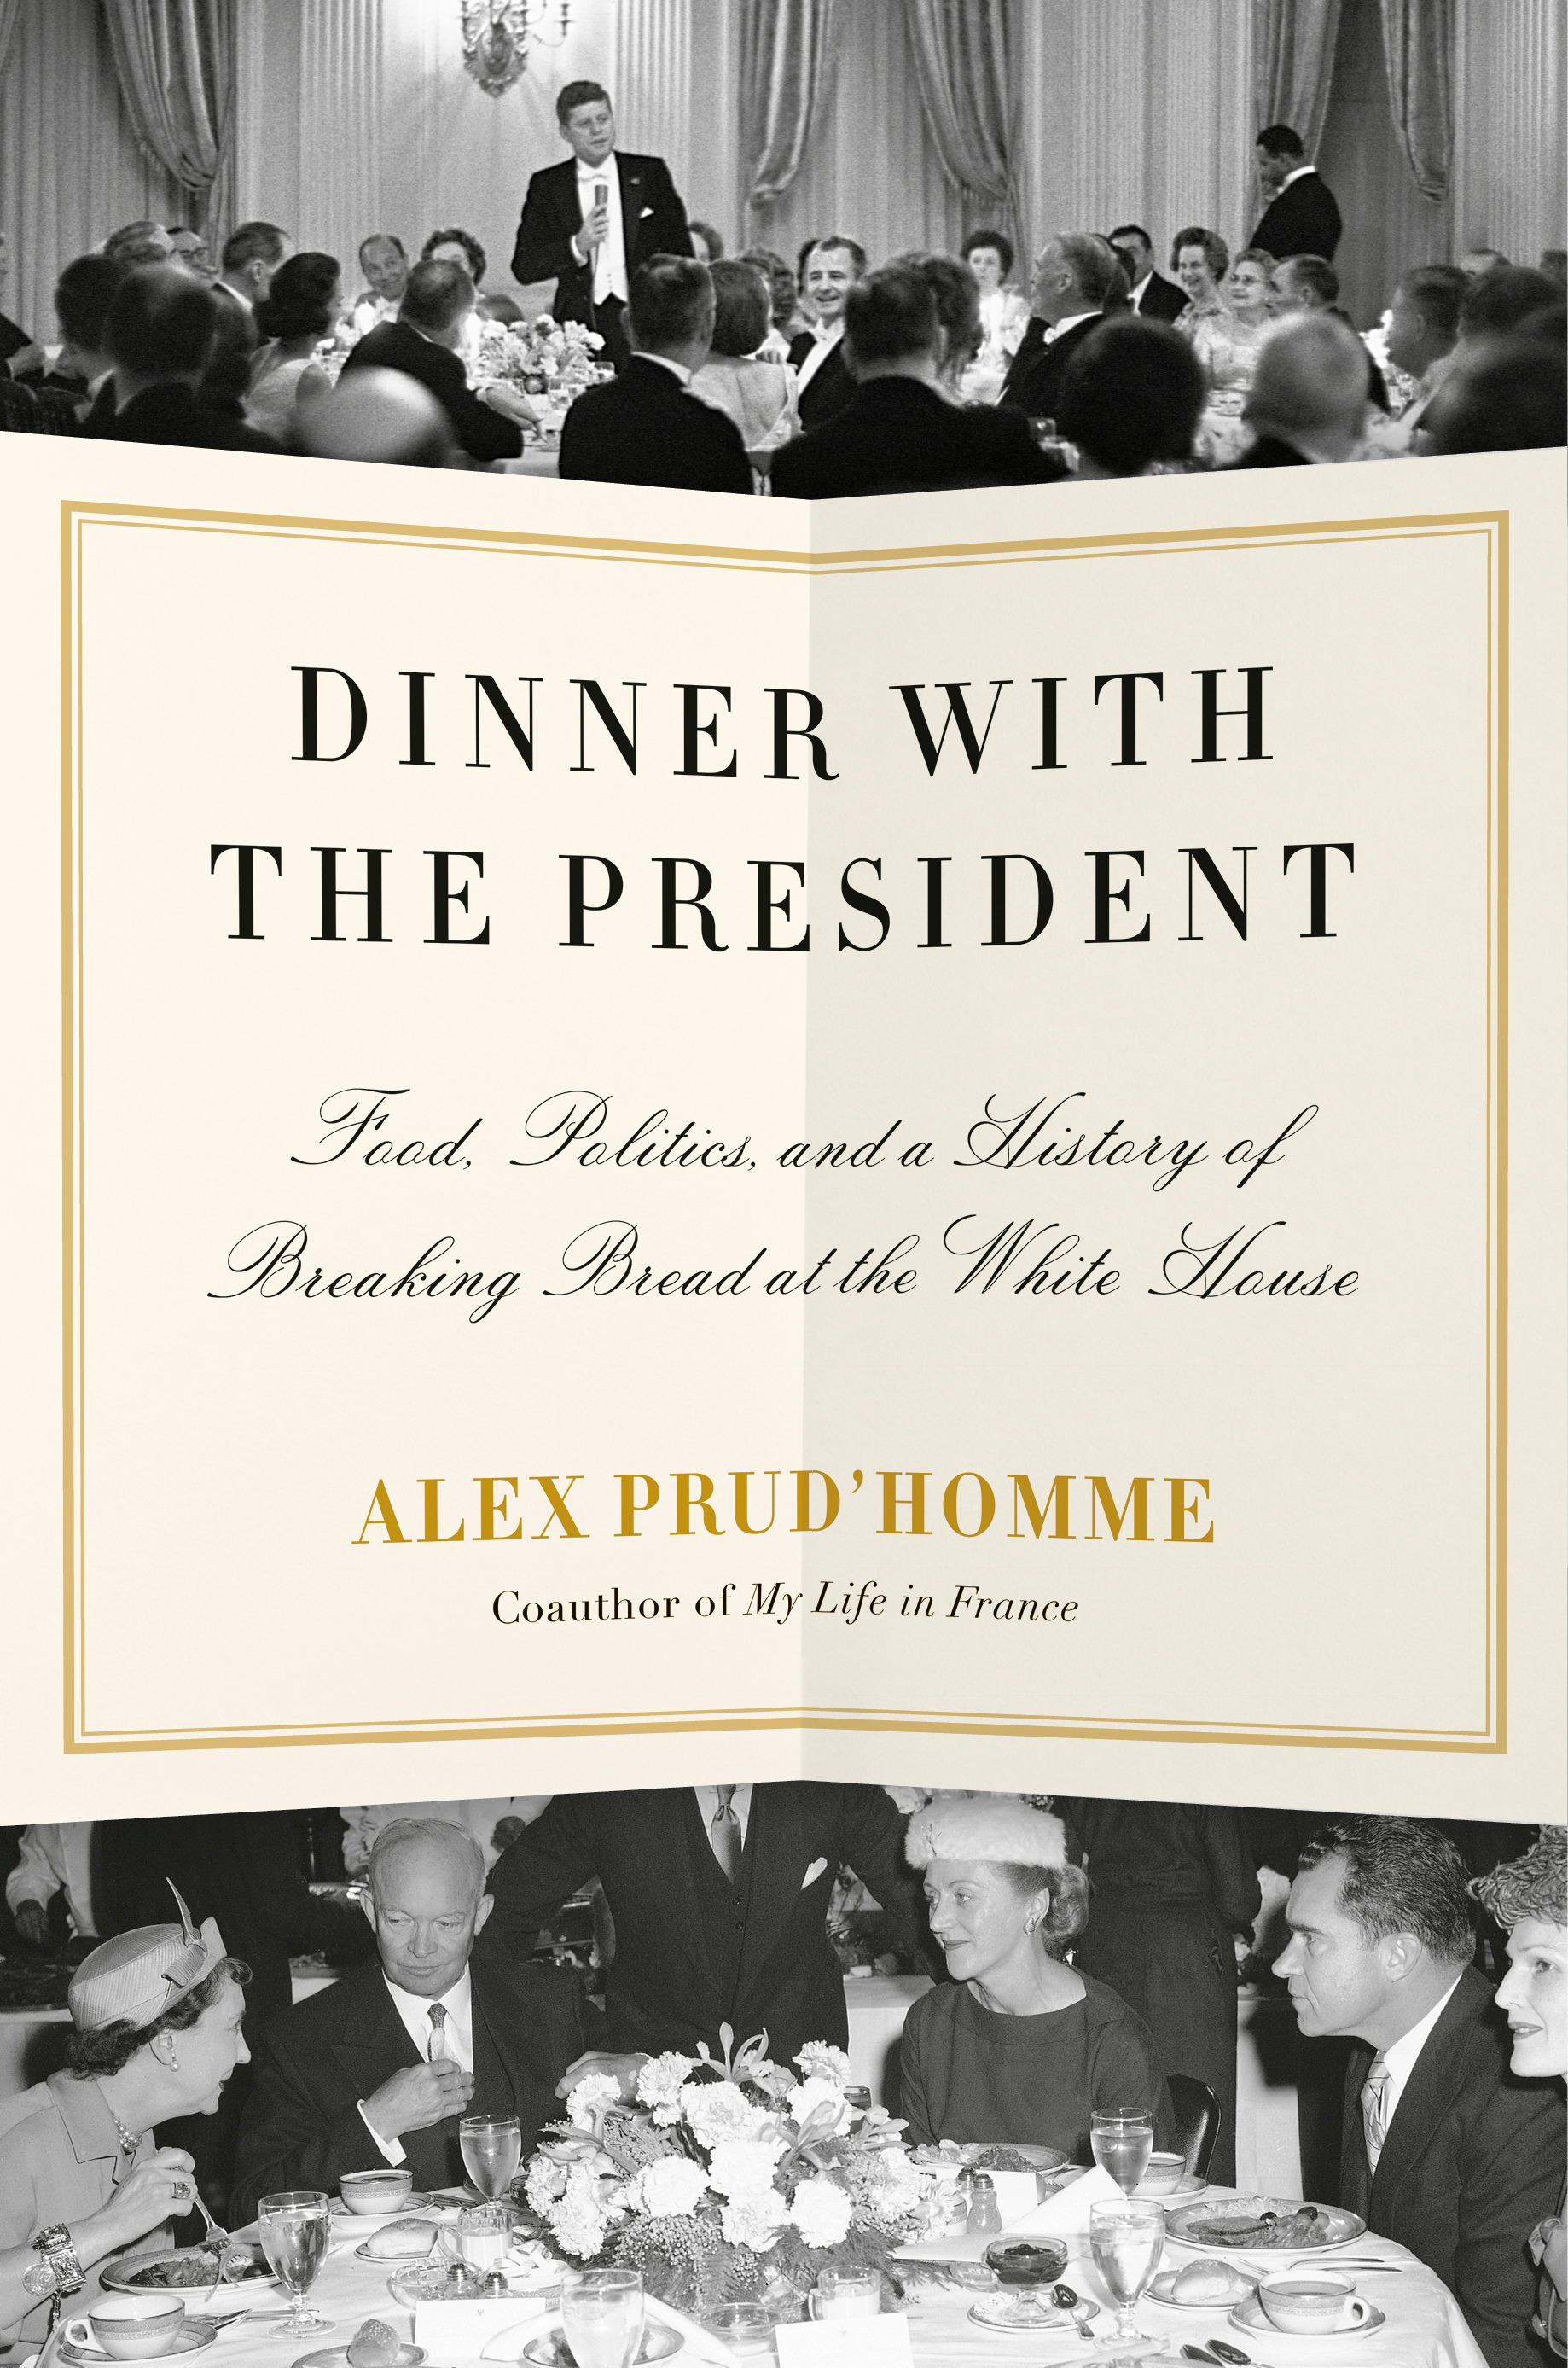 Dinner with the President : Food, Politics, and a History of Breaking Bread at the White House | Prud'homme, Alex (Auteur)